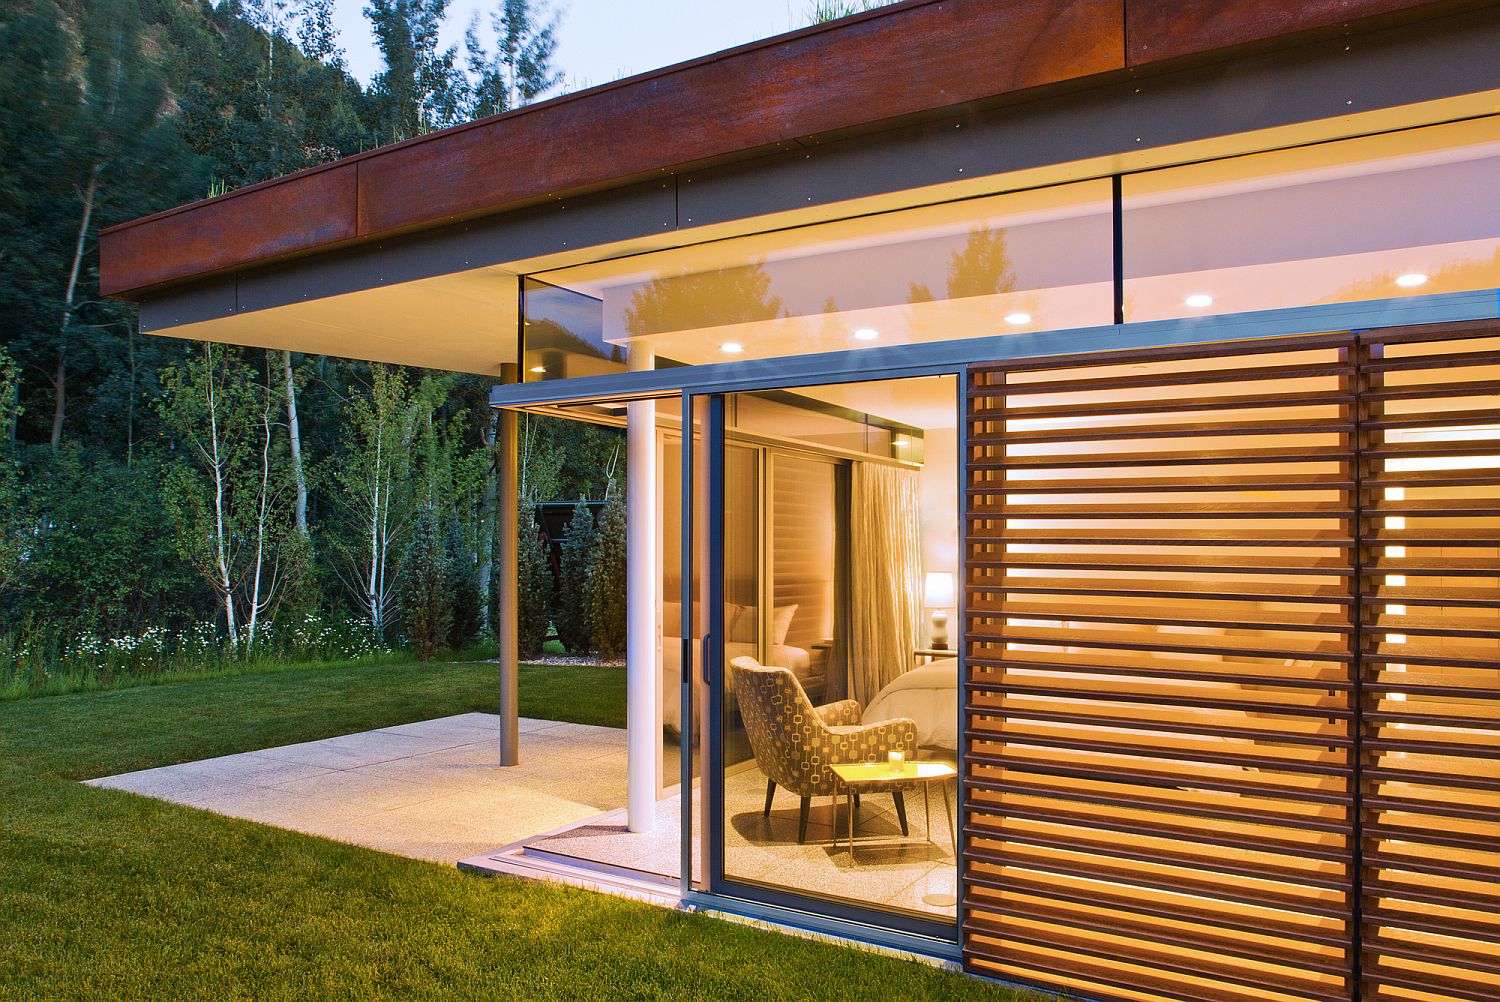 Shutters and glass doors are used cleverly to create balance between privacy and lovely views